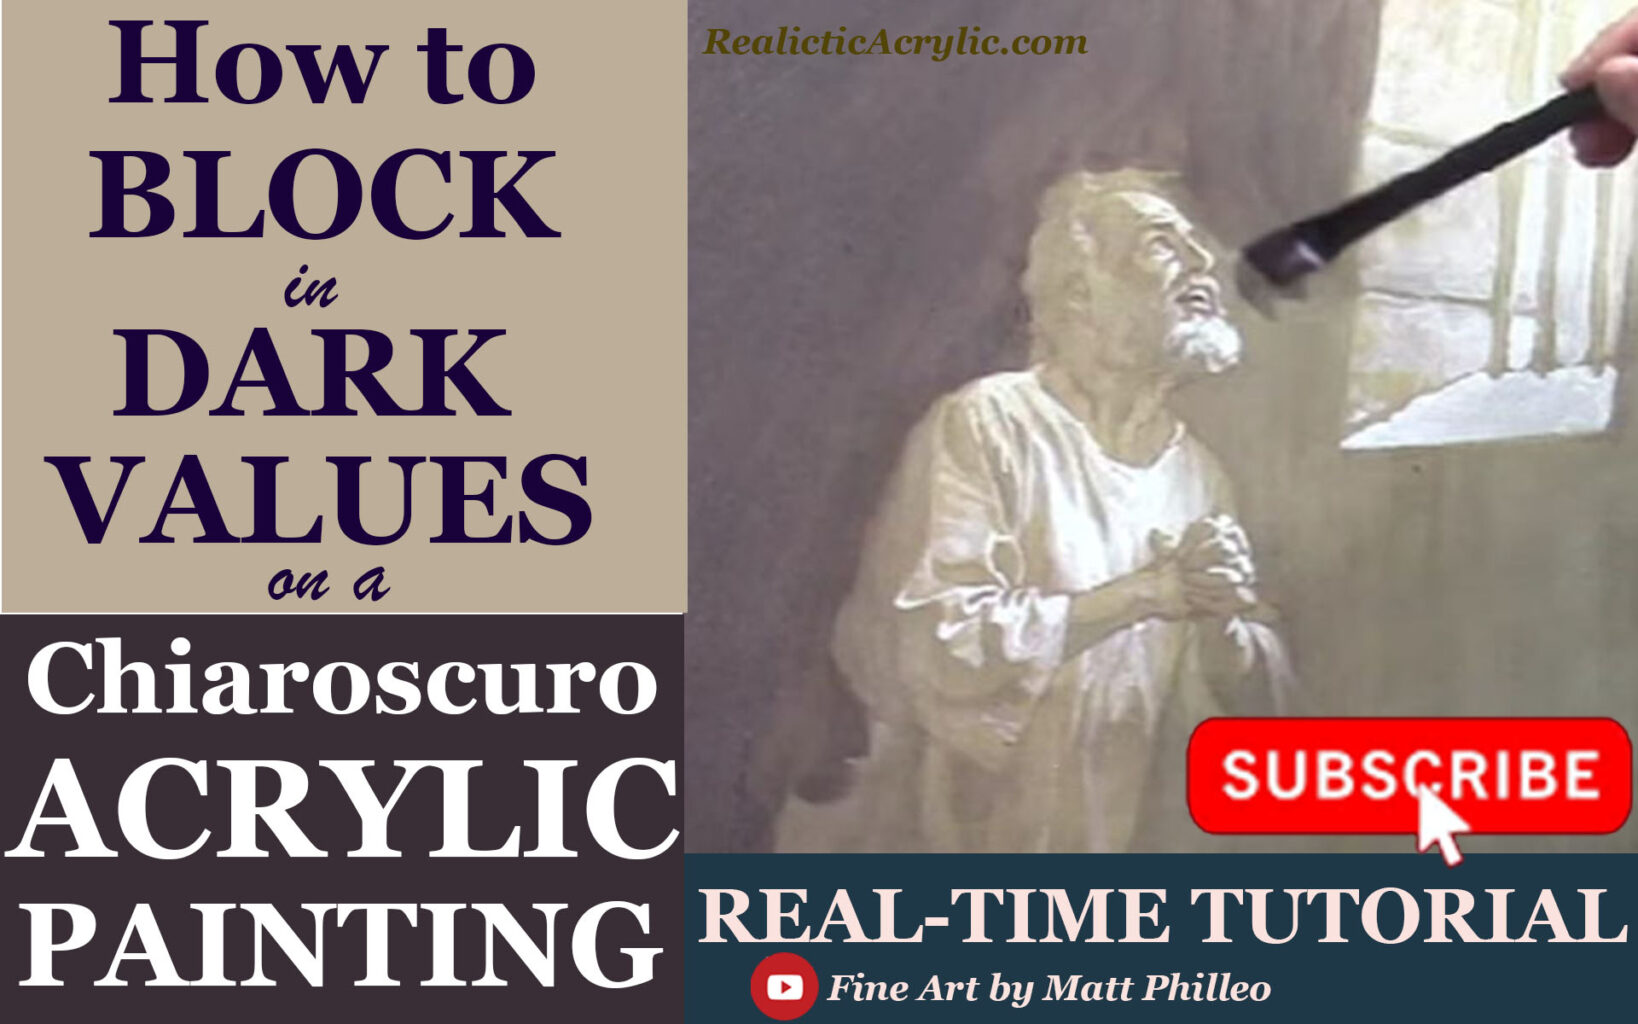 How to Block in Dark Values on a Chiaroscuro Acrylic Painting